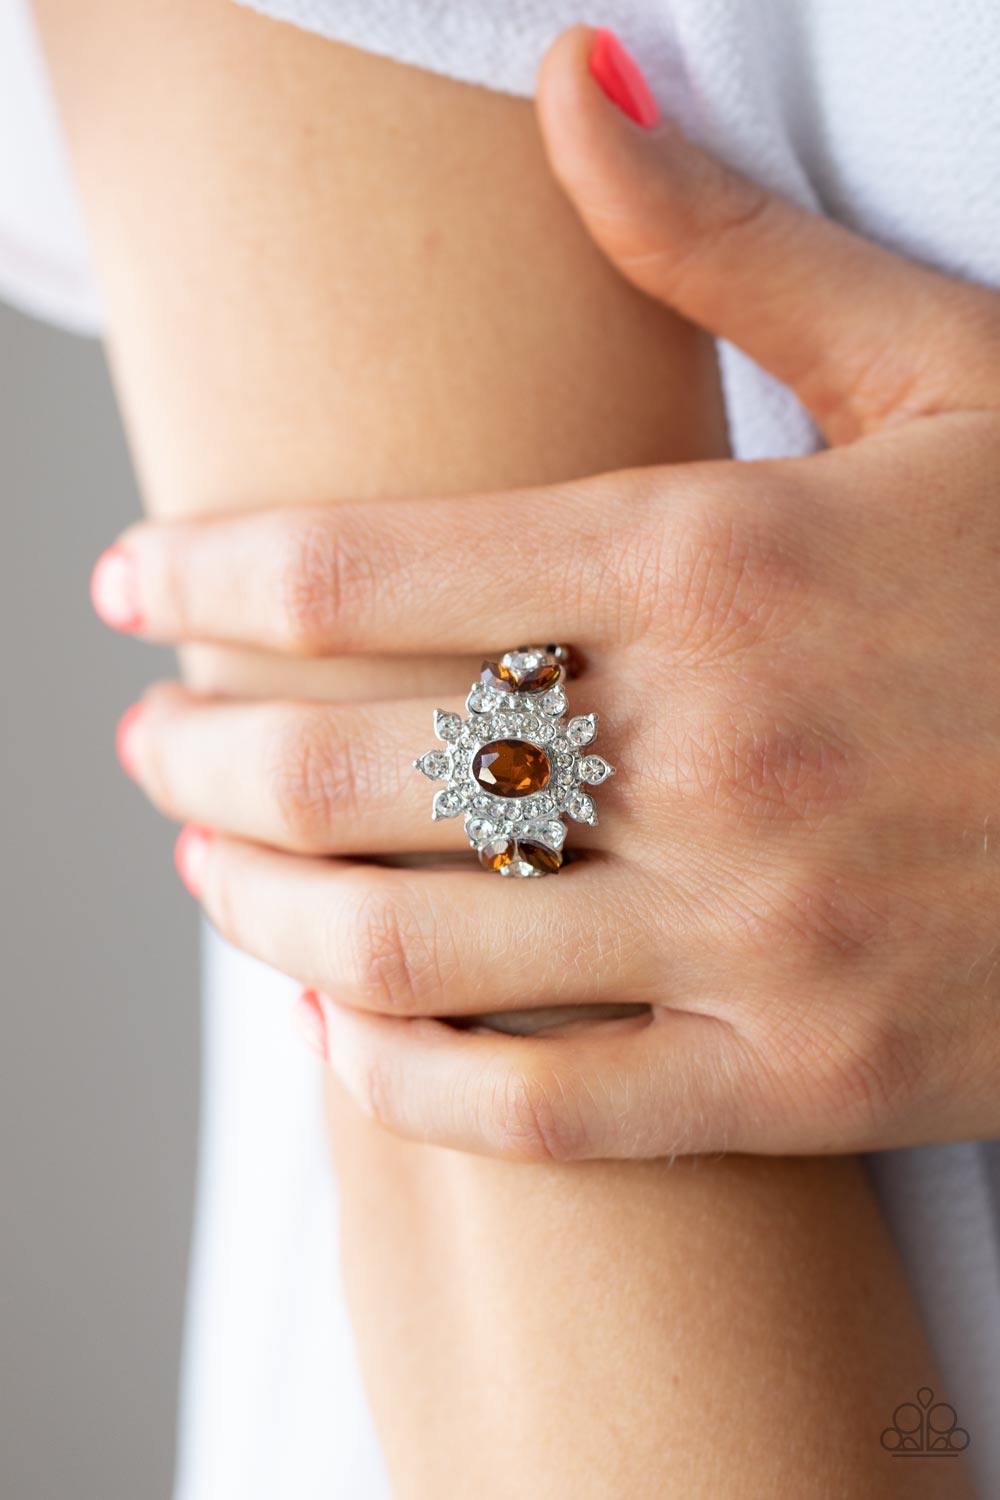 The Princess and the FROND Brown & White Gem Ring - Paparazzi Accessories- lightbox - CarasShop.com - $5 Jewelry by Cara Jewels